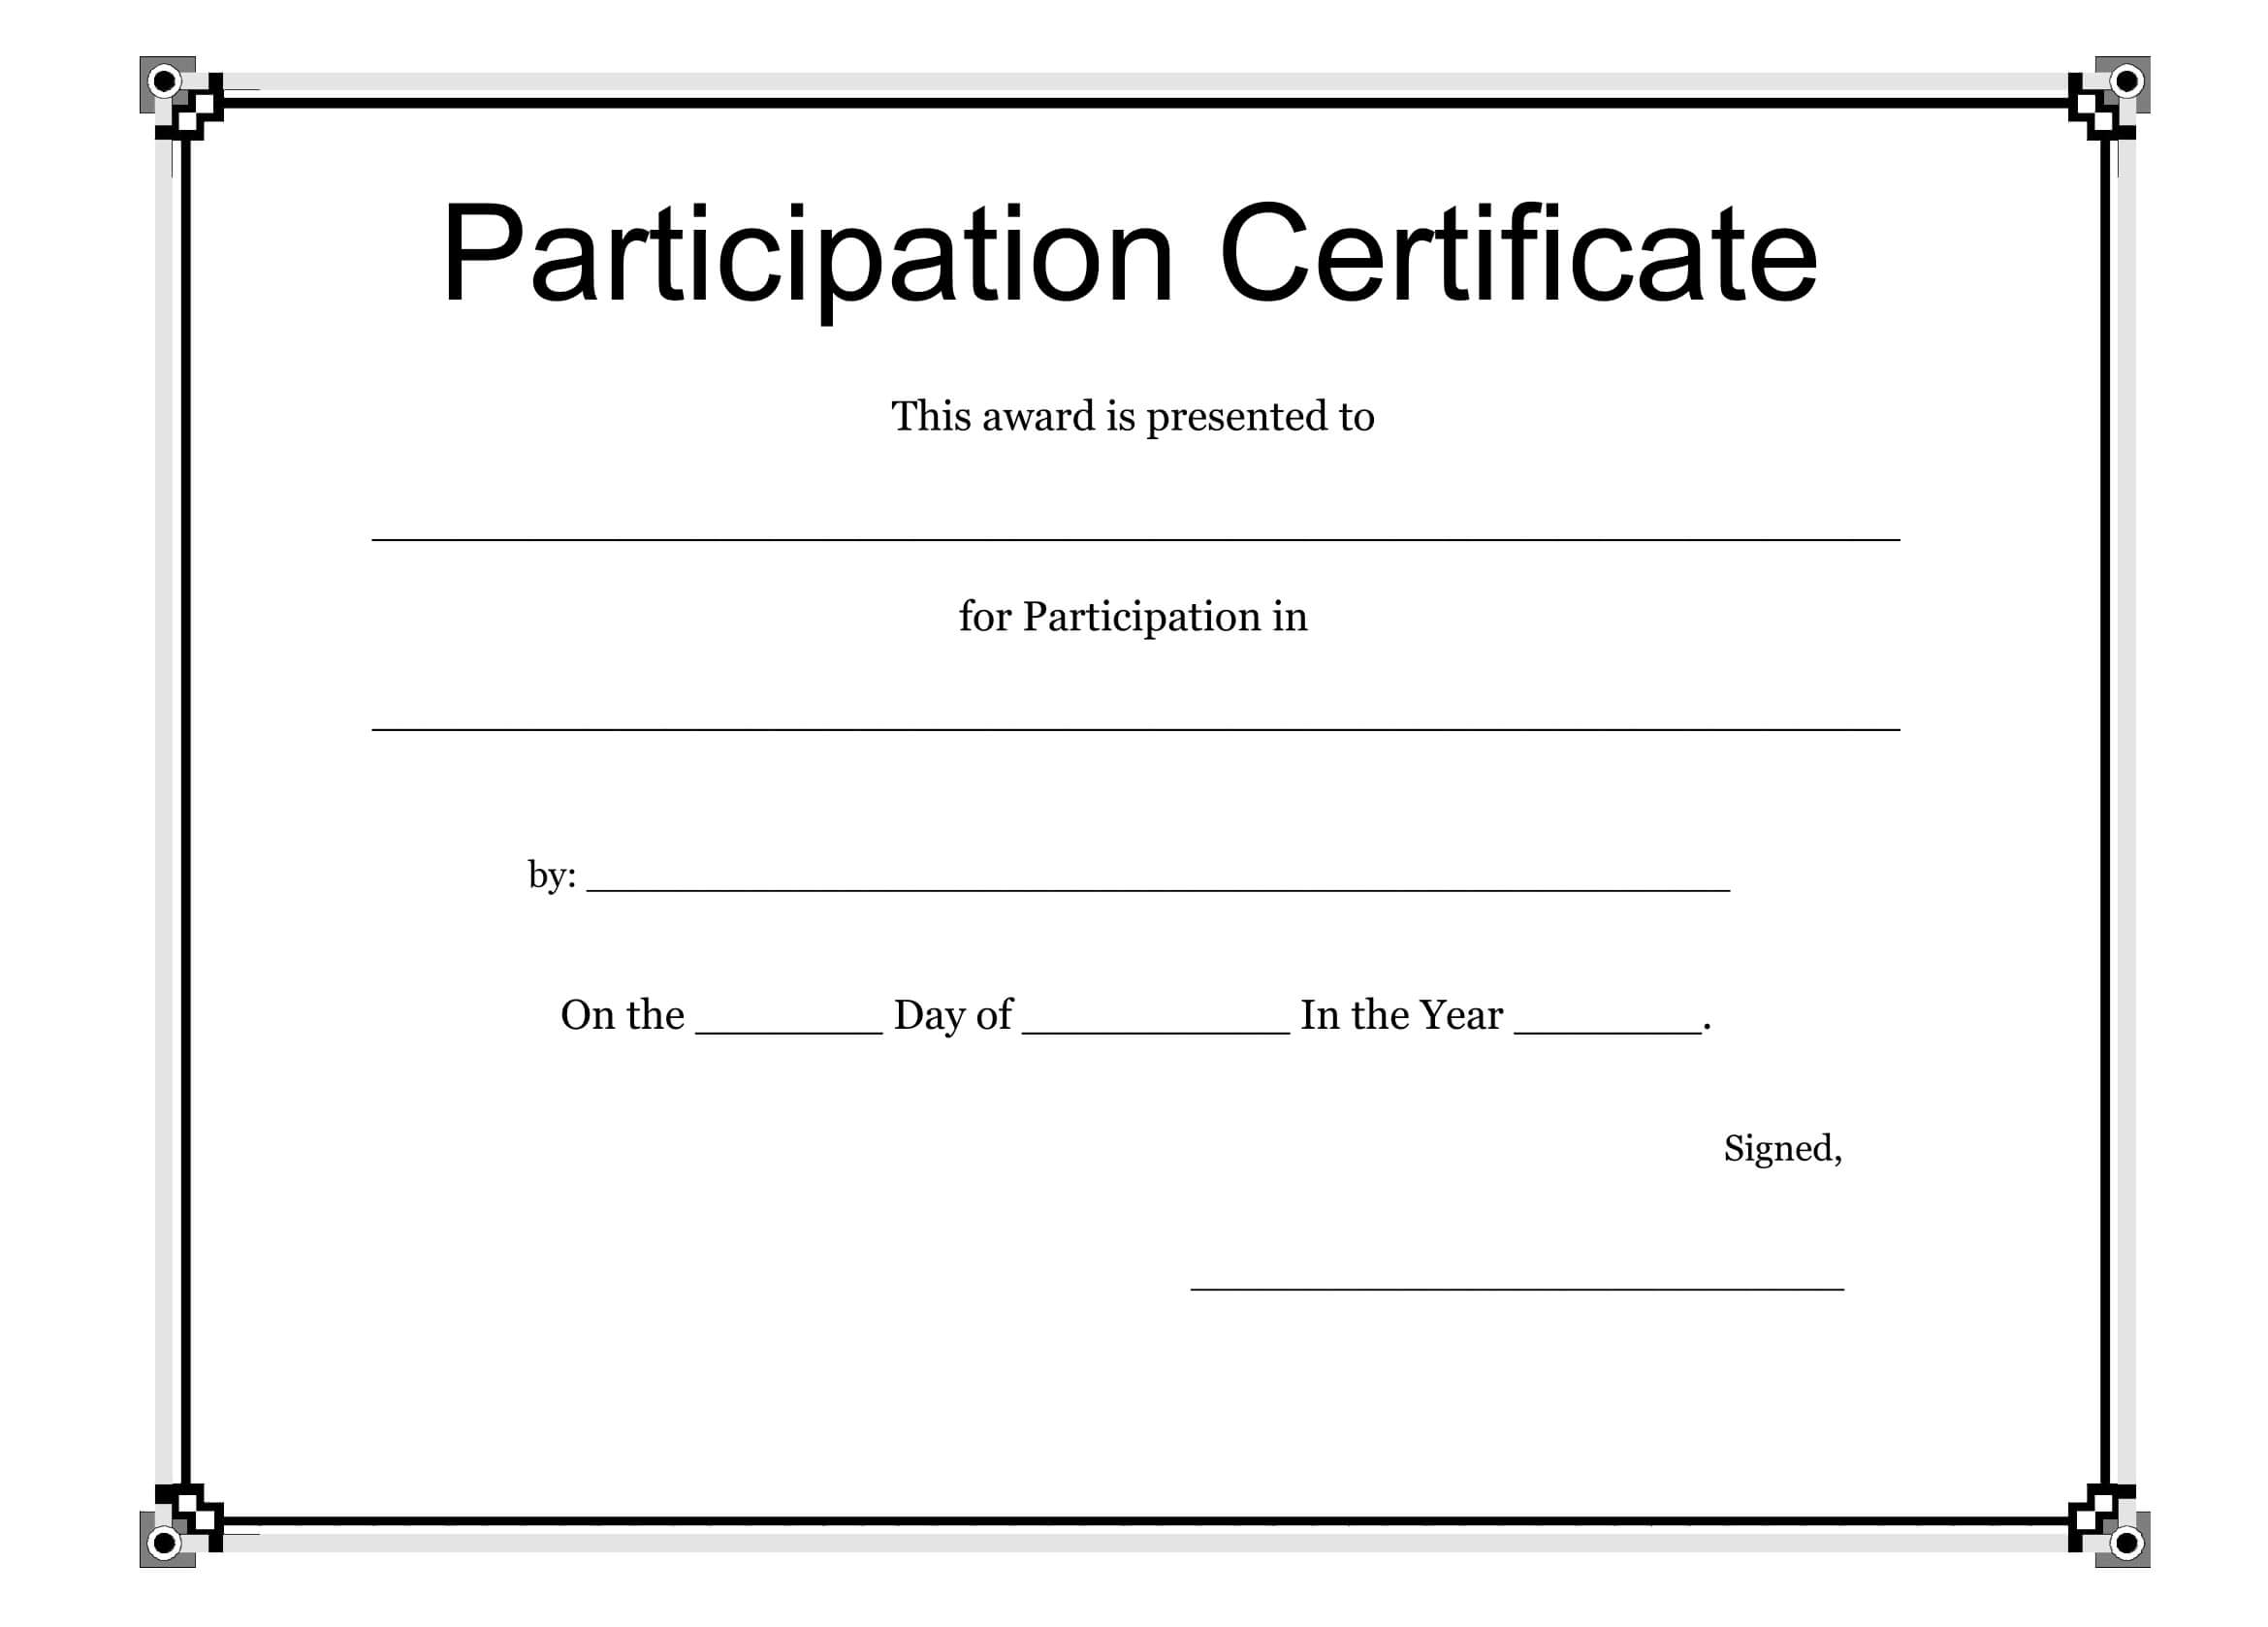 Participation Certificate Template Free Download with Participation